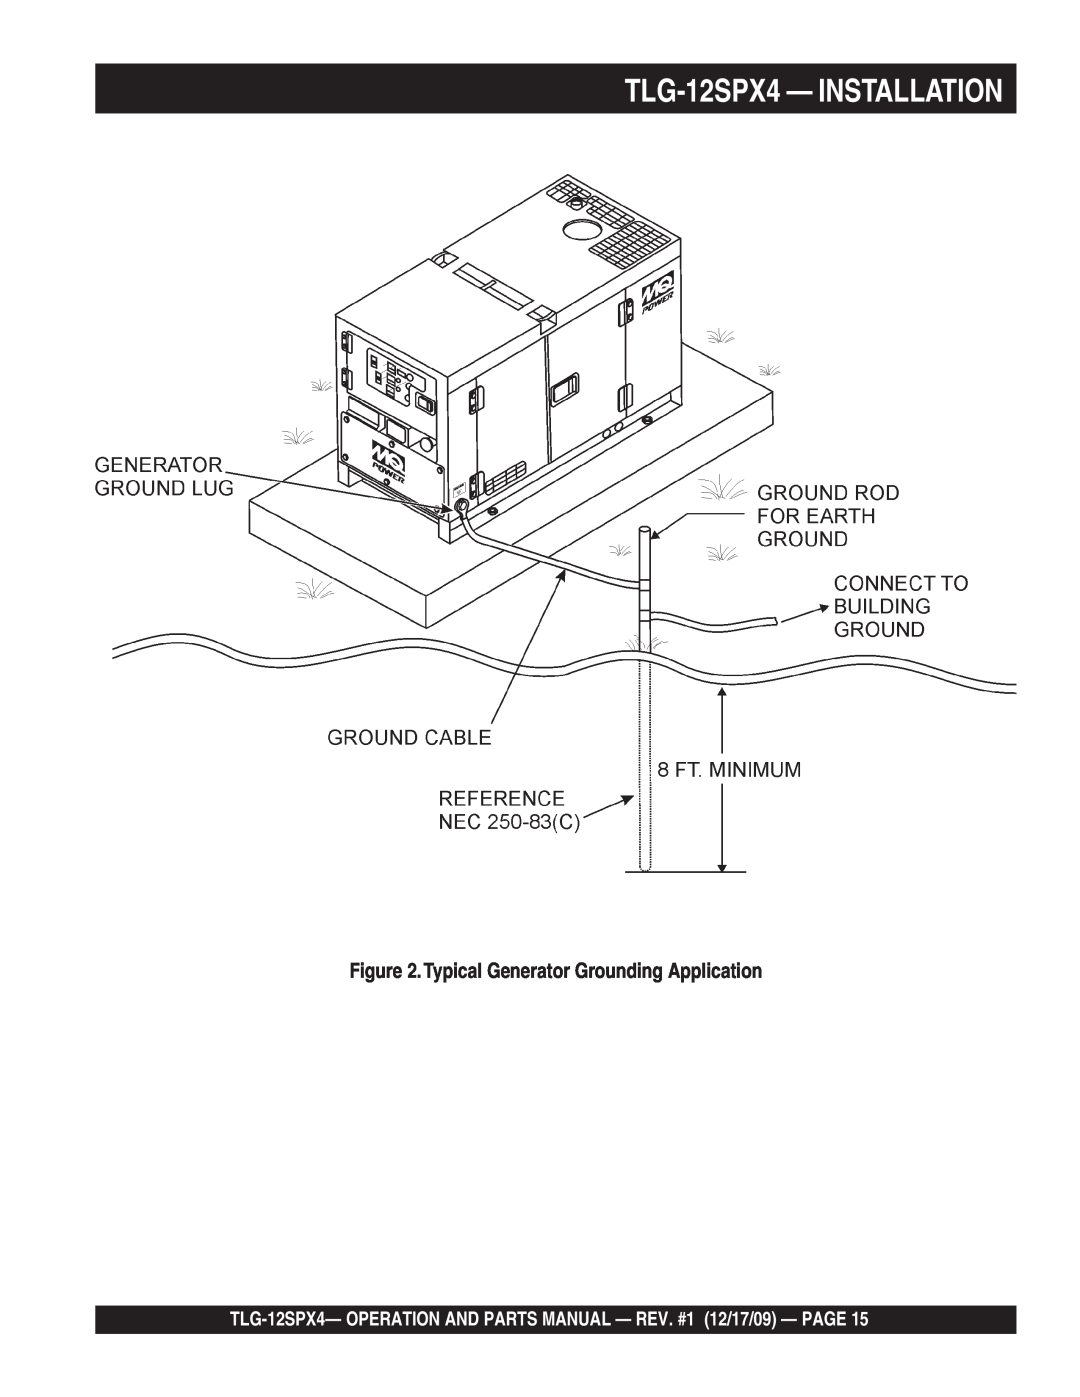 Multiquip operation manual TLG-12SPX4- INSTALLATION, Typical Generator Grounding Application 